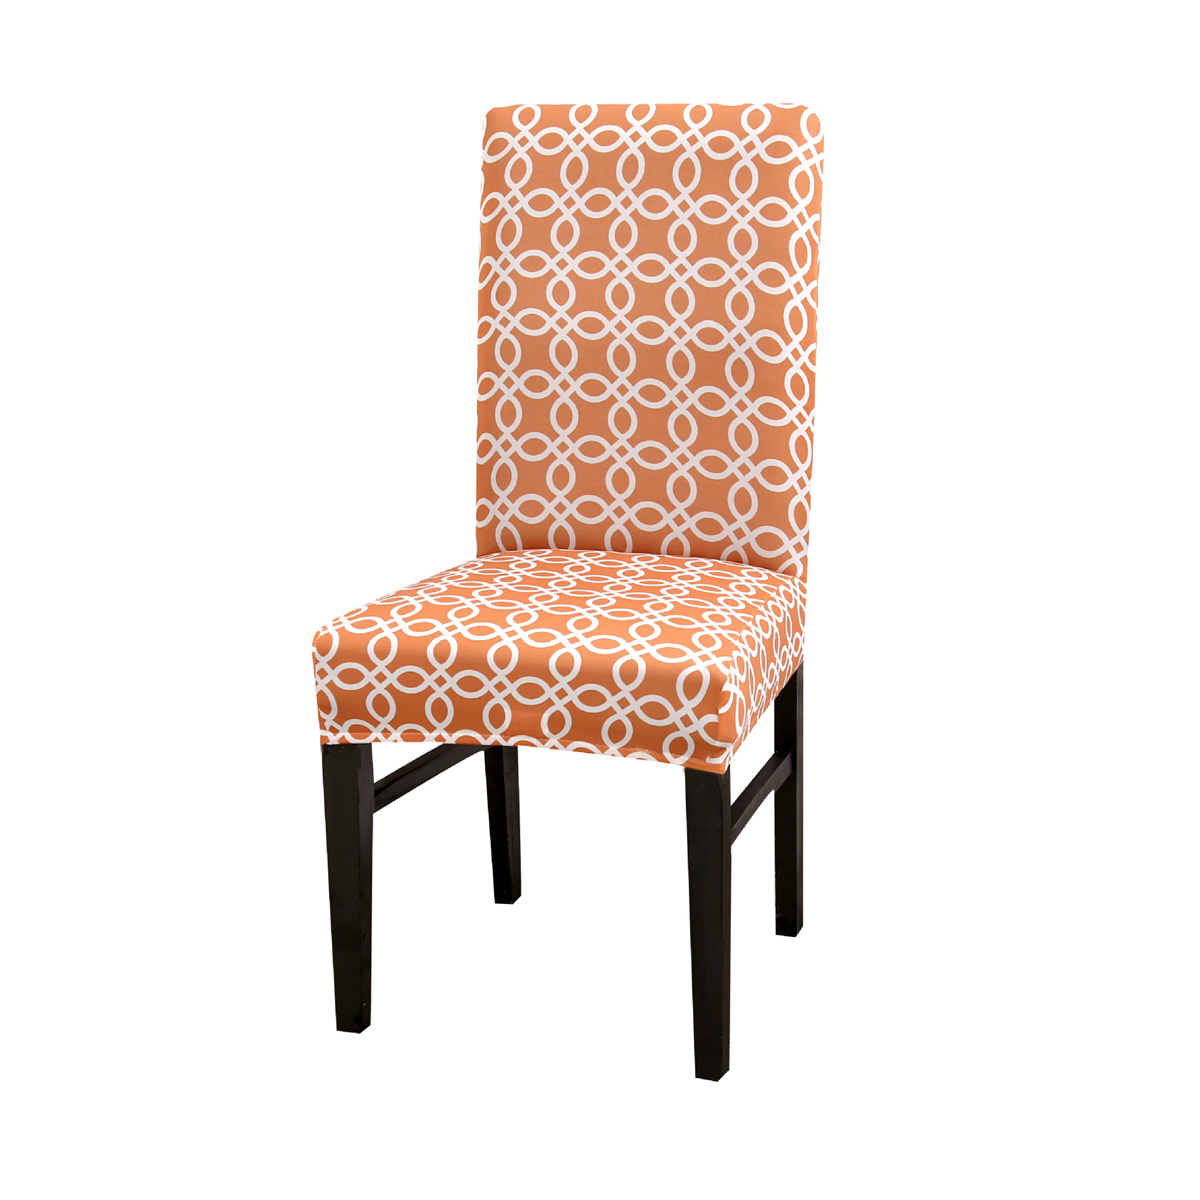 Elastic-Dining-Chair-Cover-Stain-resistant-Geometry-Printing-Seat-Chair-Cover-Spandex-Elastic-Seat-C-1925458-9